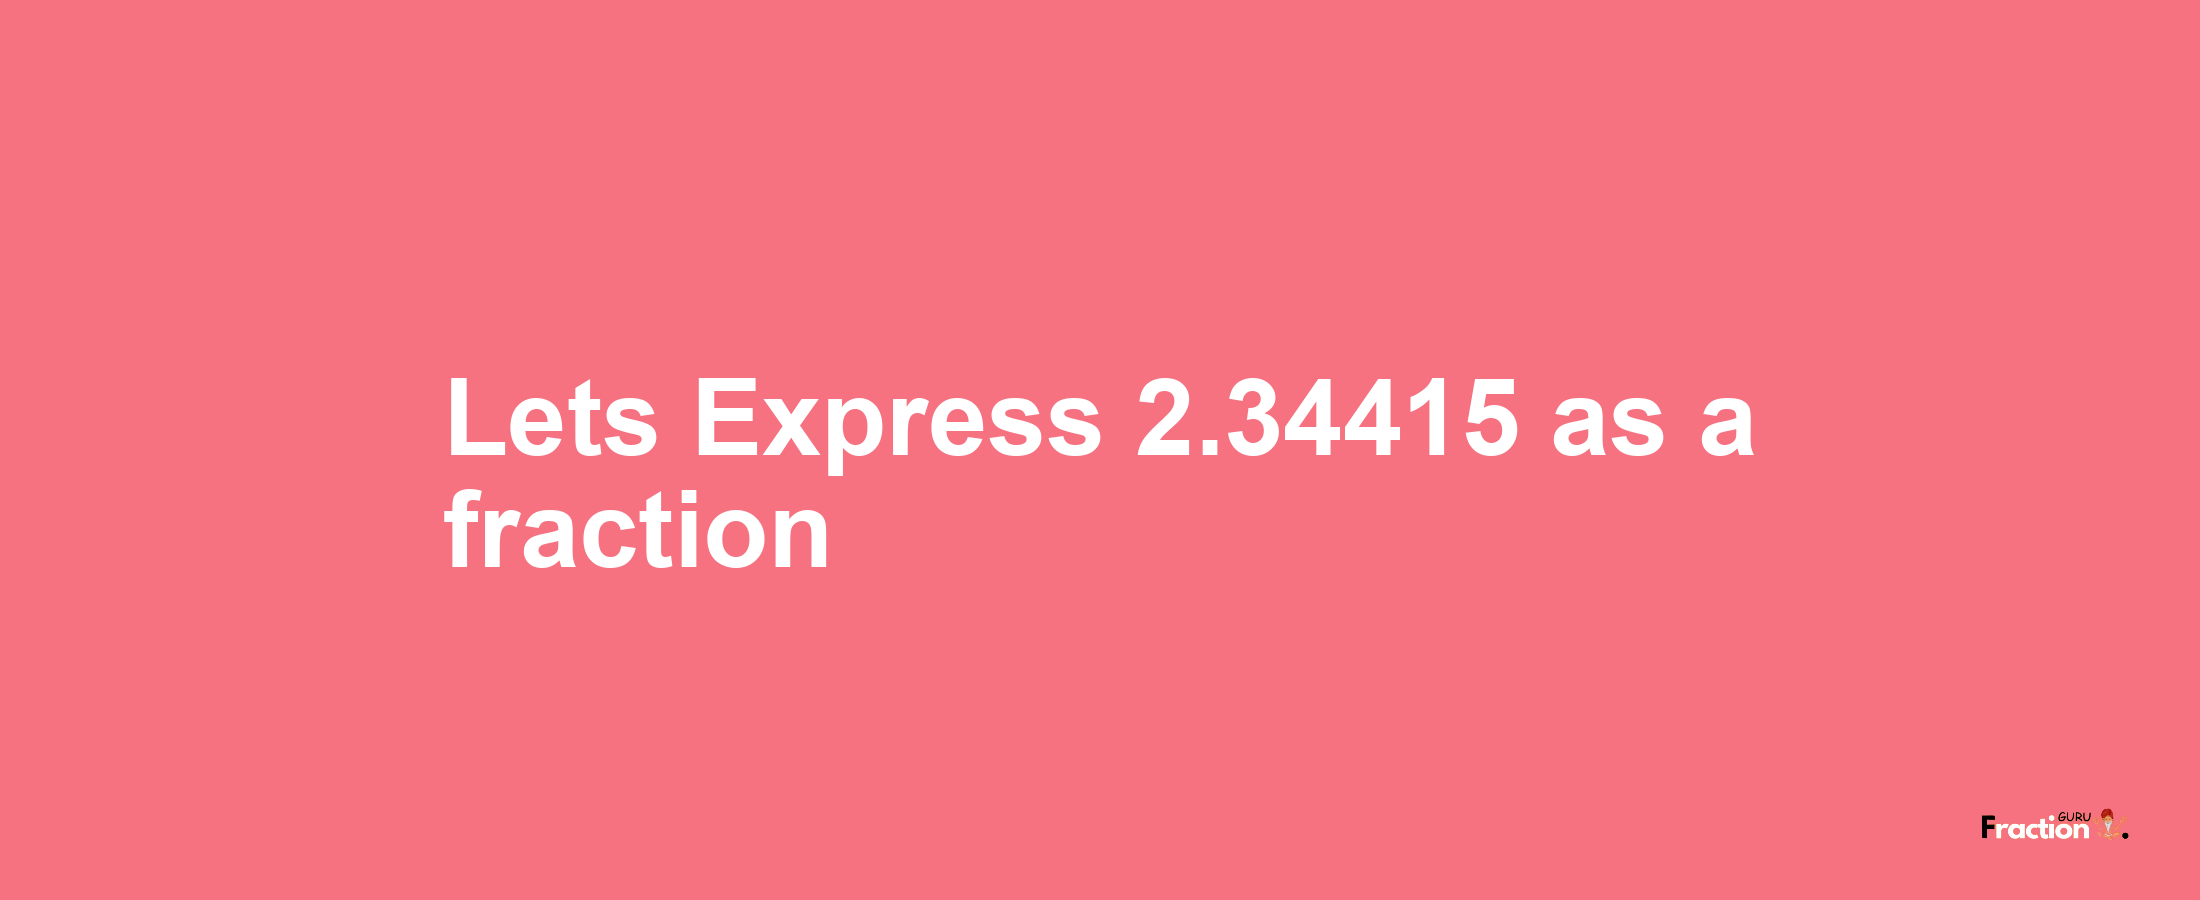 Lets Express 2.34415 as afraction